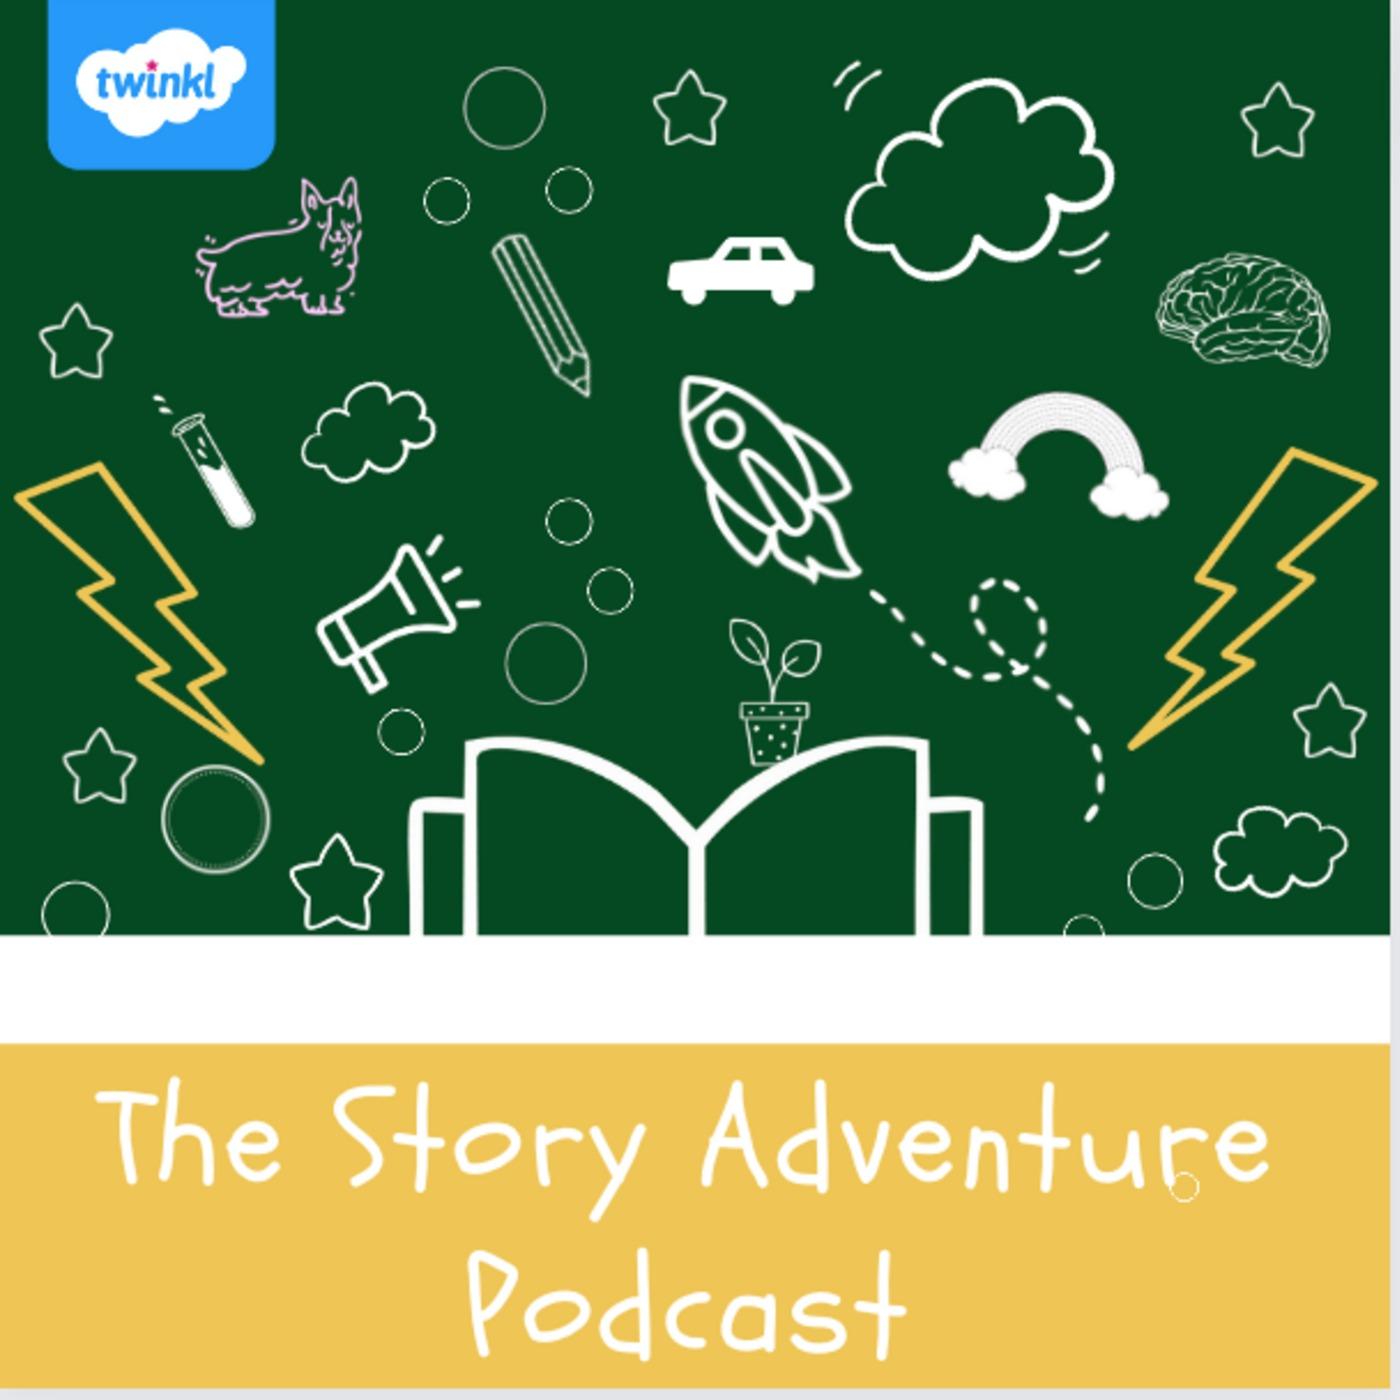 The Story Adventure Podcast